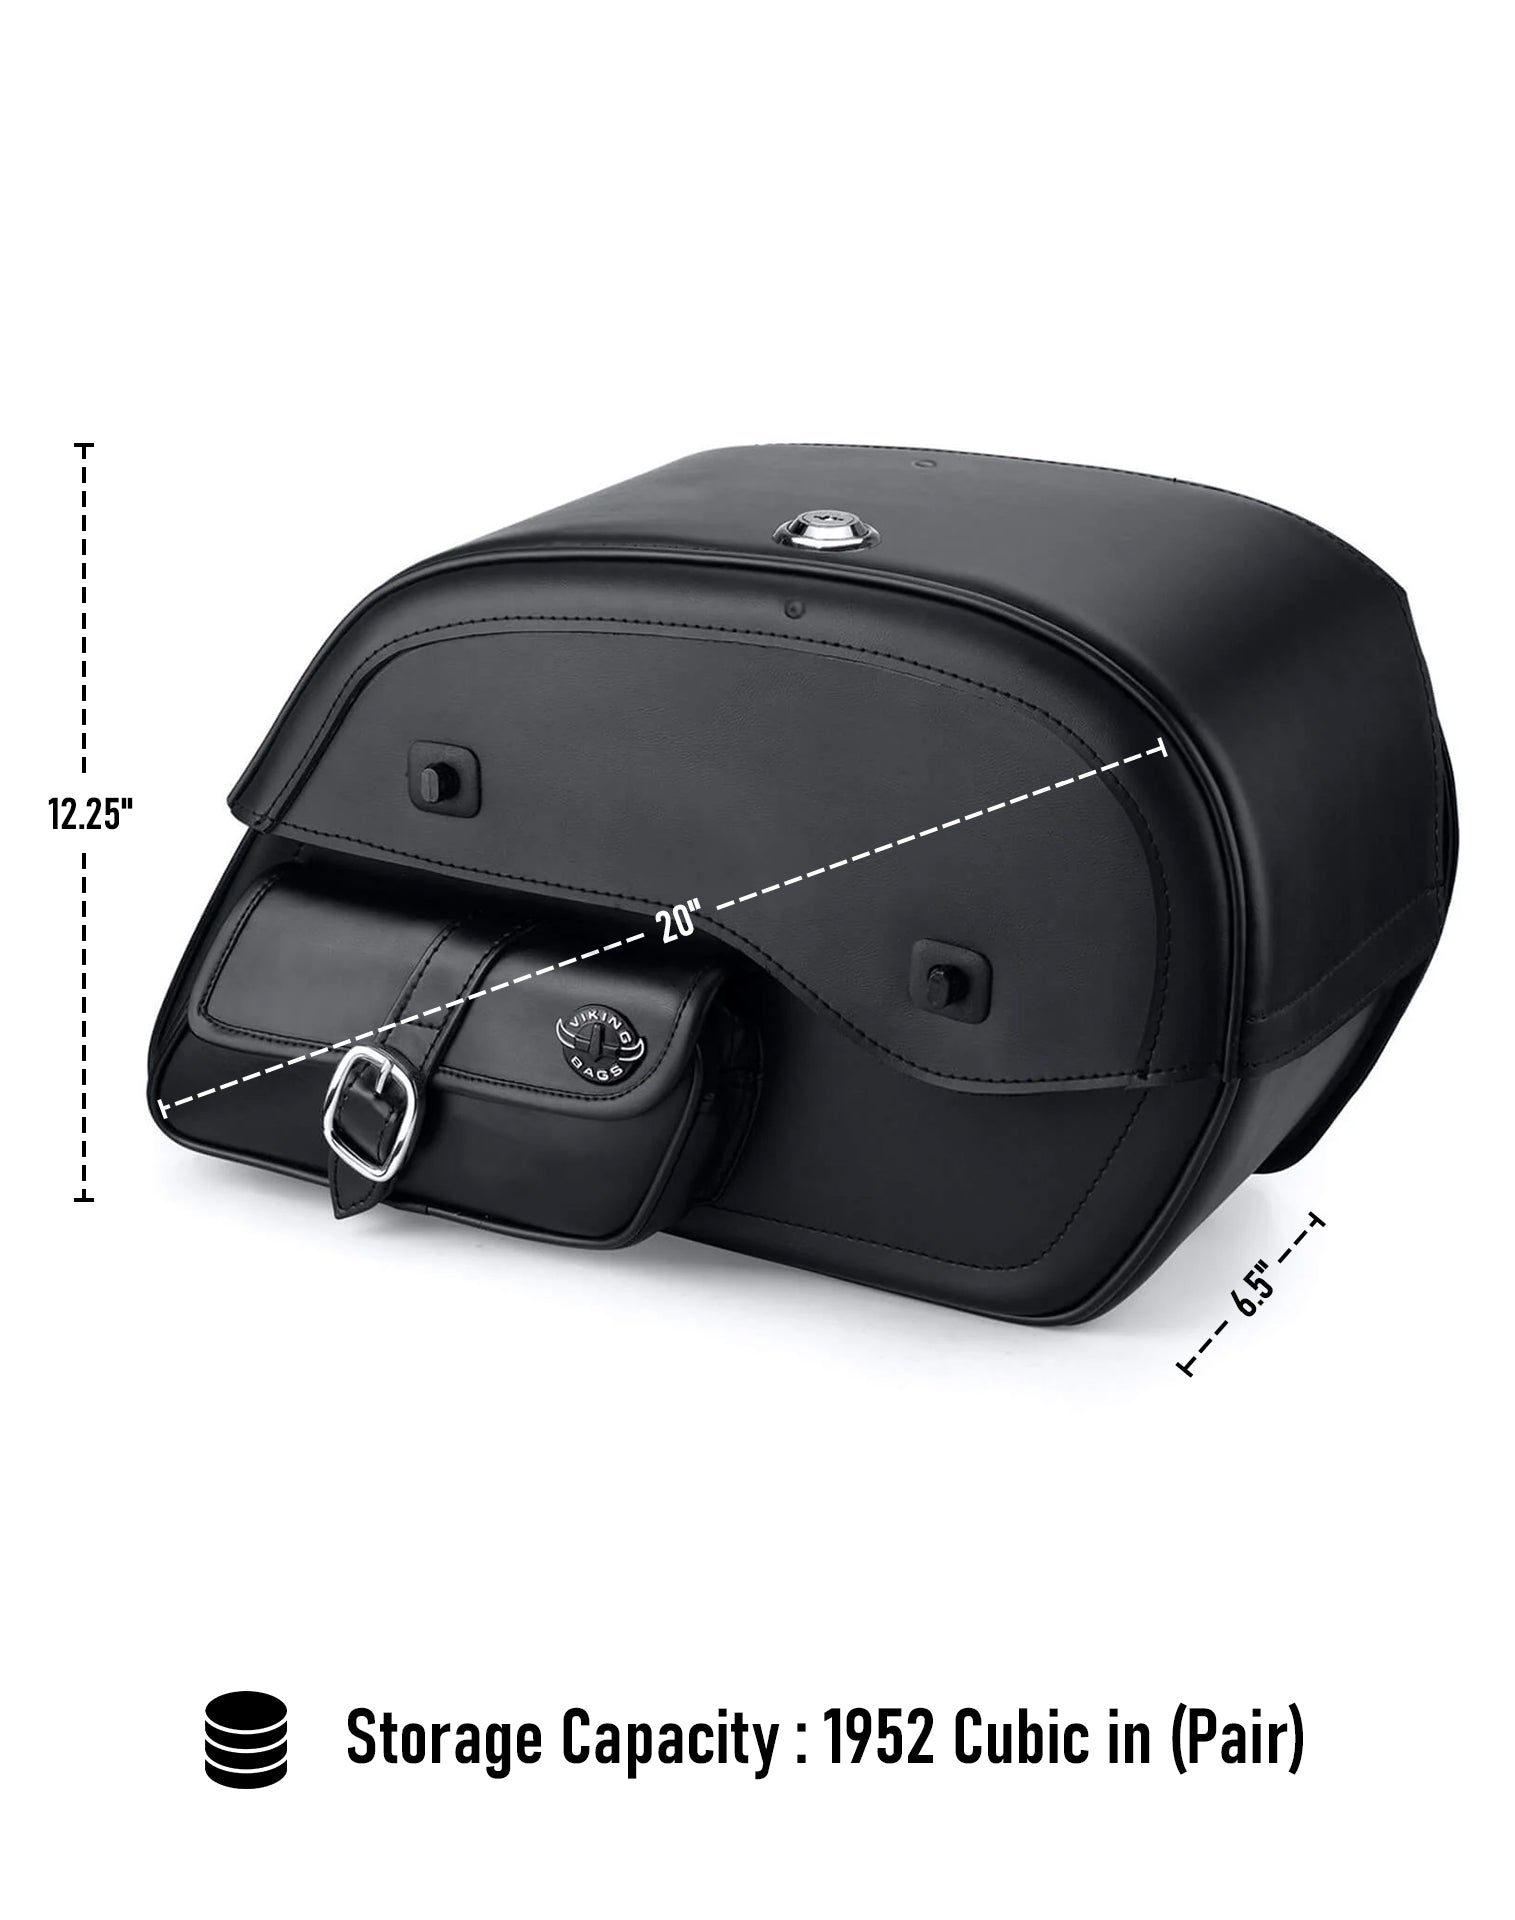 Viking Essential Side Pocket Large Kawasaki Vulcan 1700 Classic Vn1700 Leather Motorcycle Saddlebags Can Store Your Ridings Gears